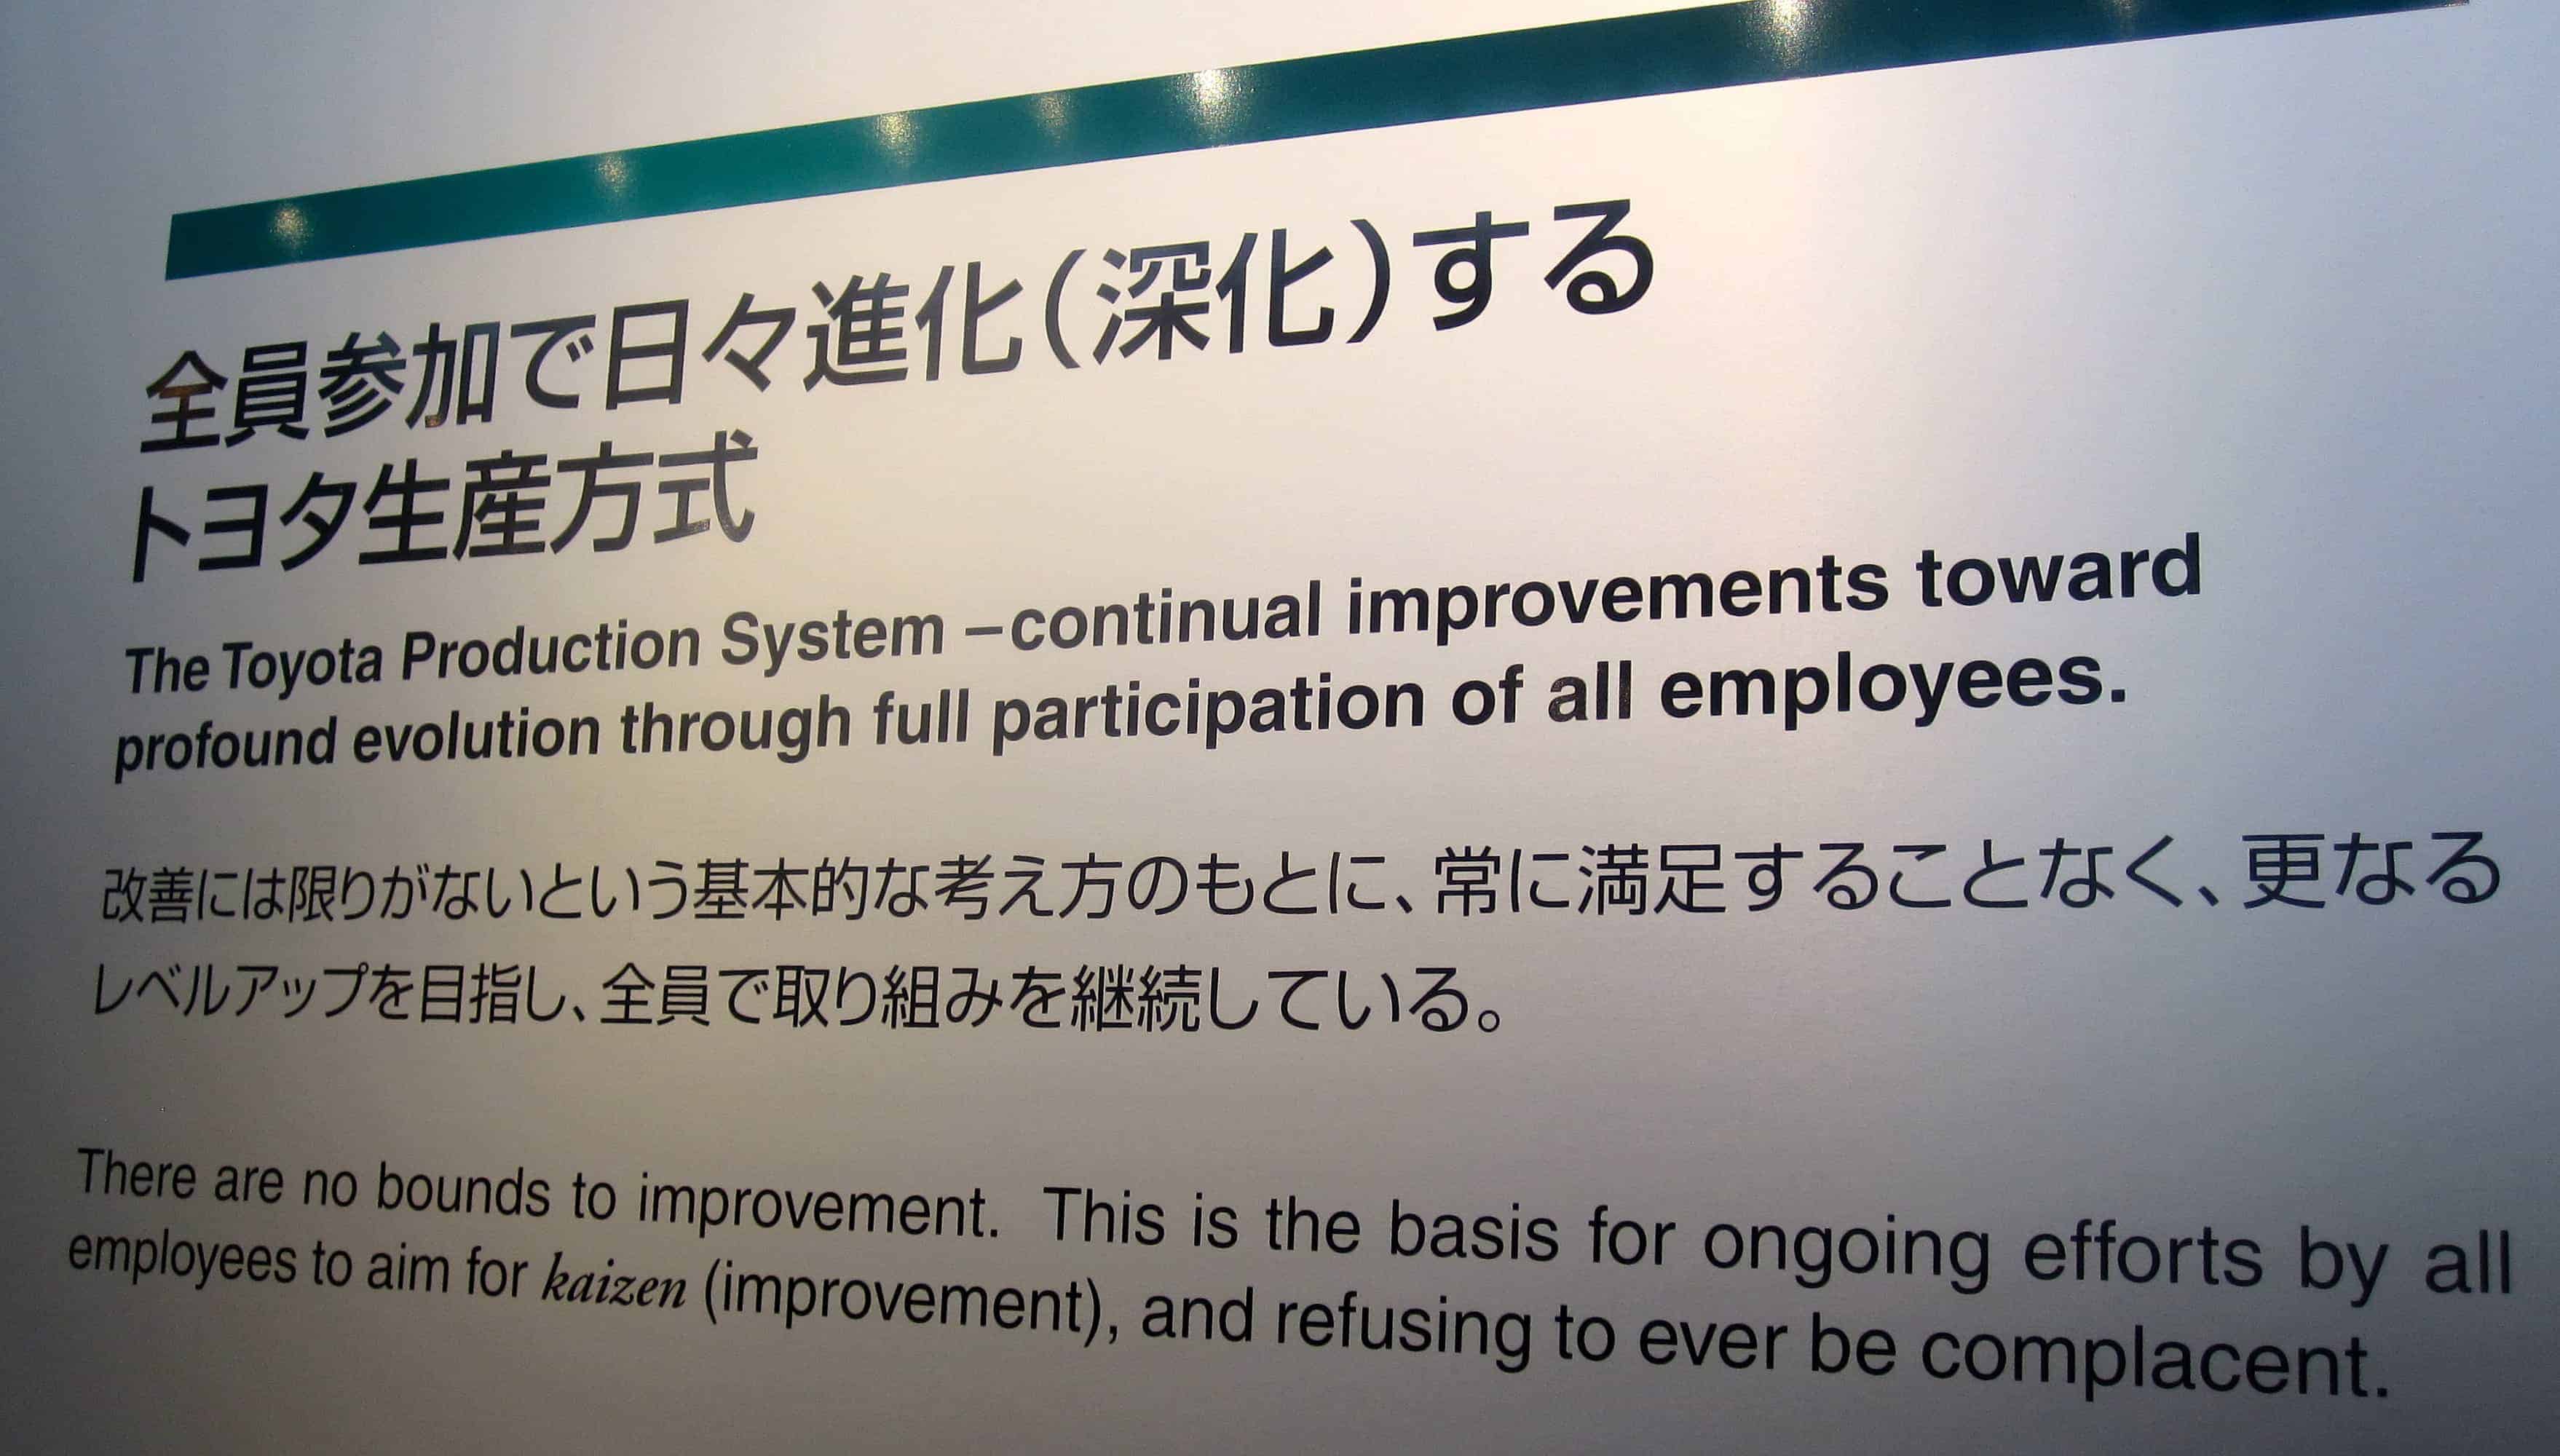 The Toyota Production System - continual improvements toward profound evolution through full participation of all employees.